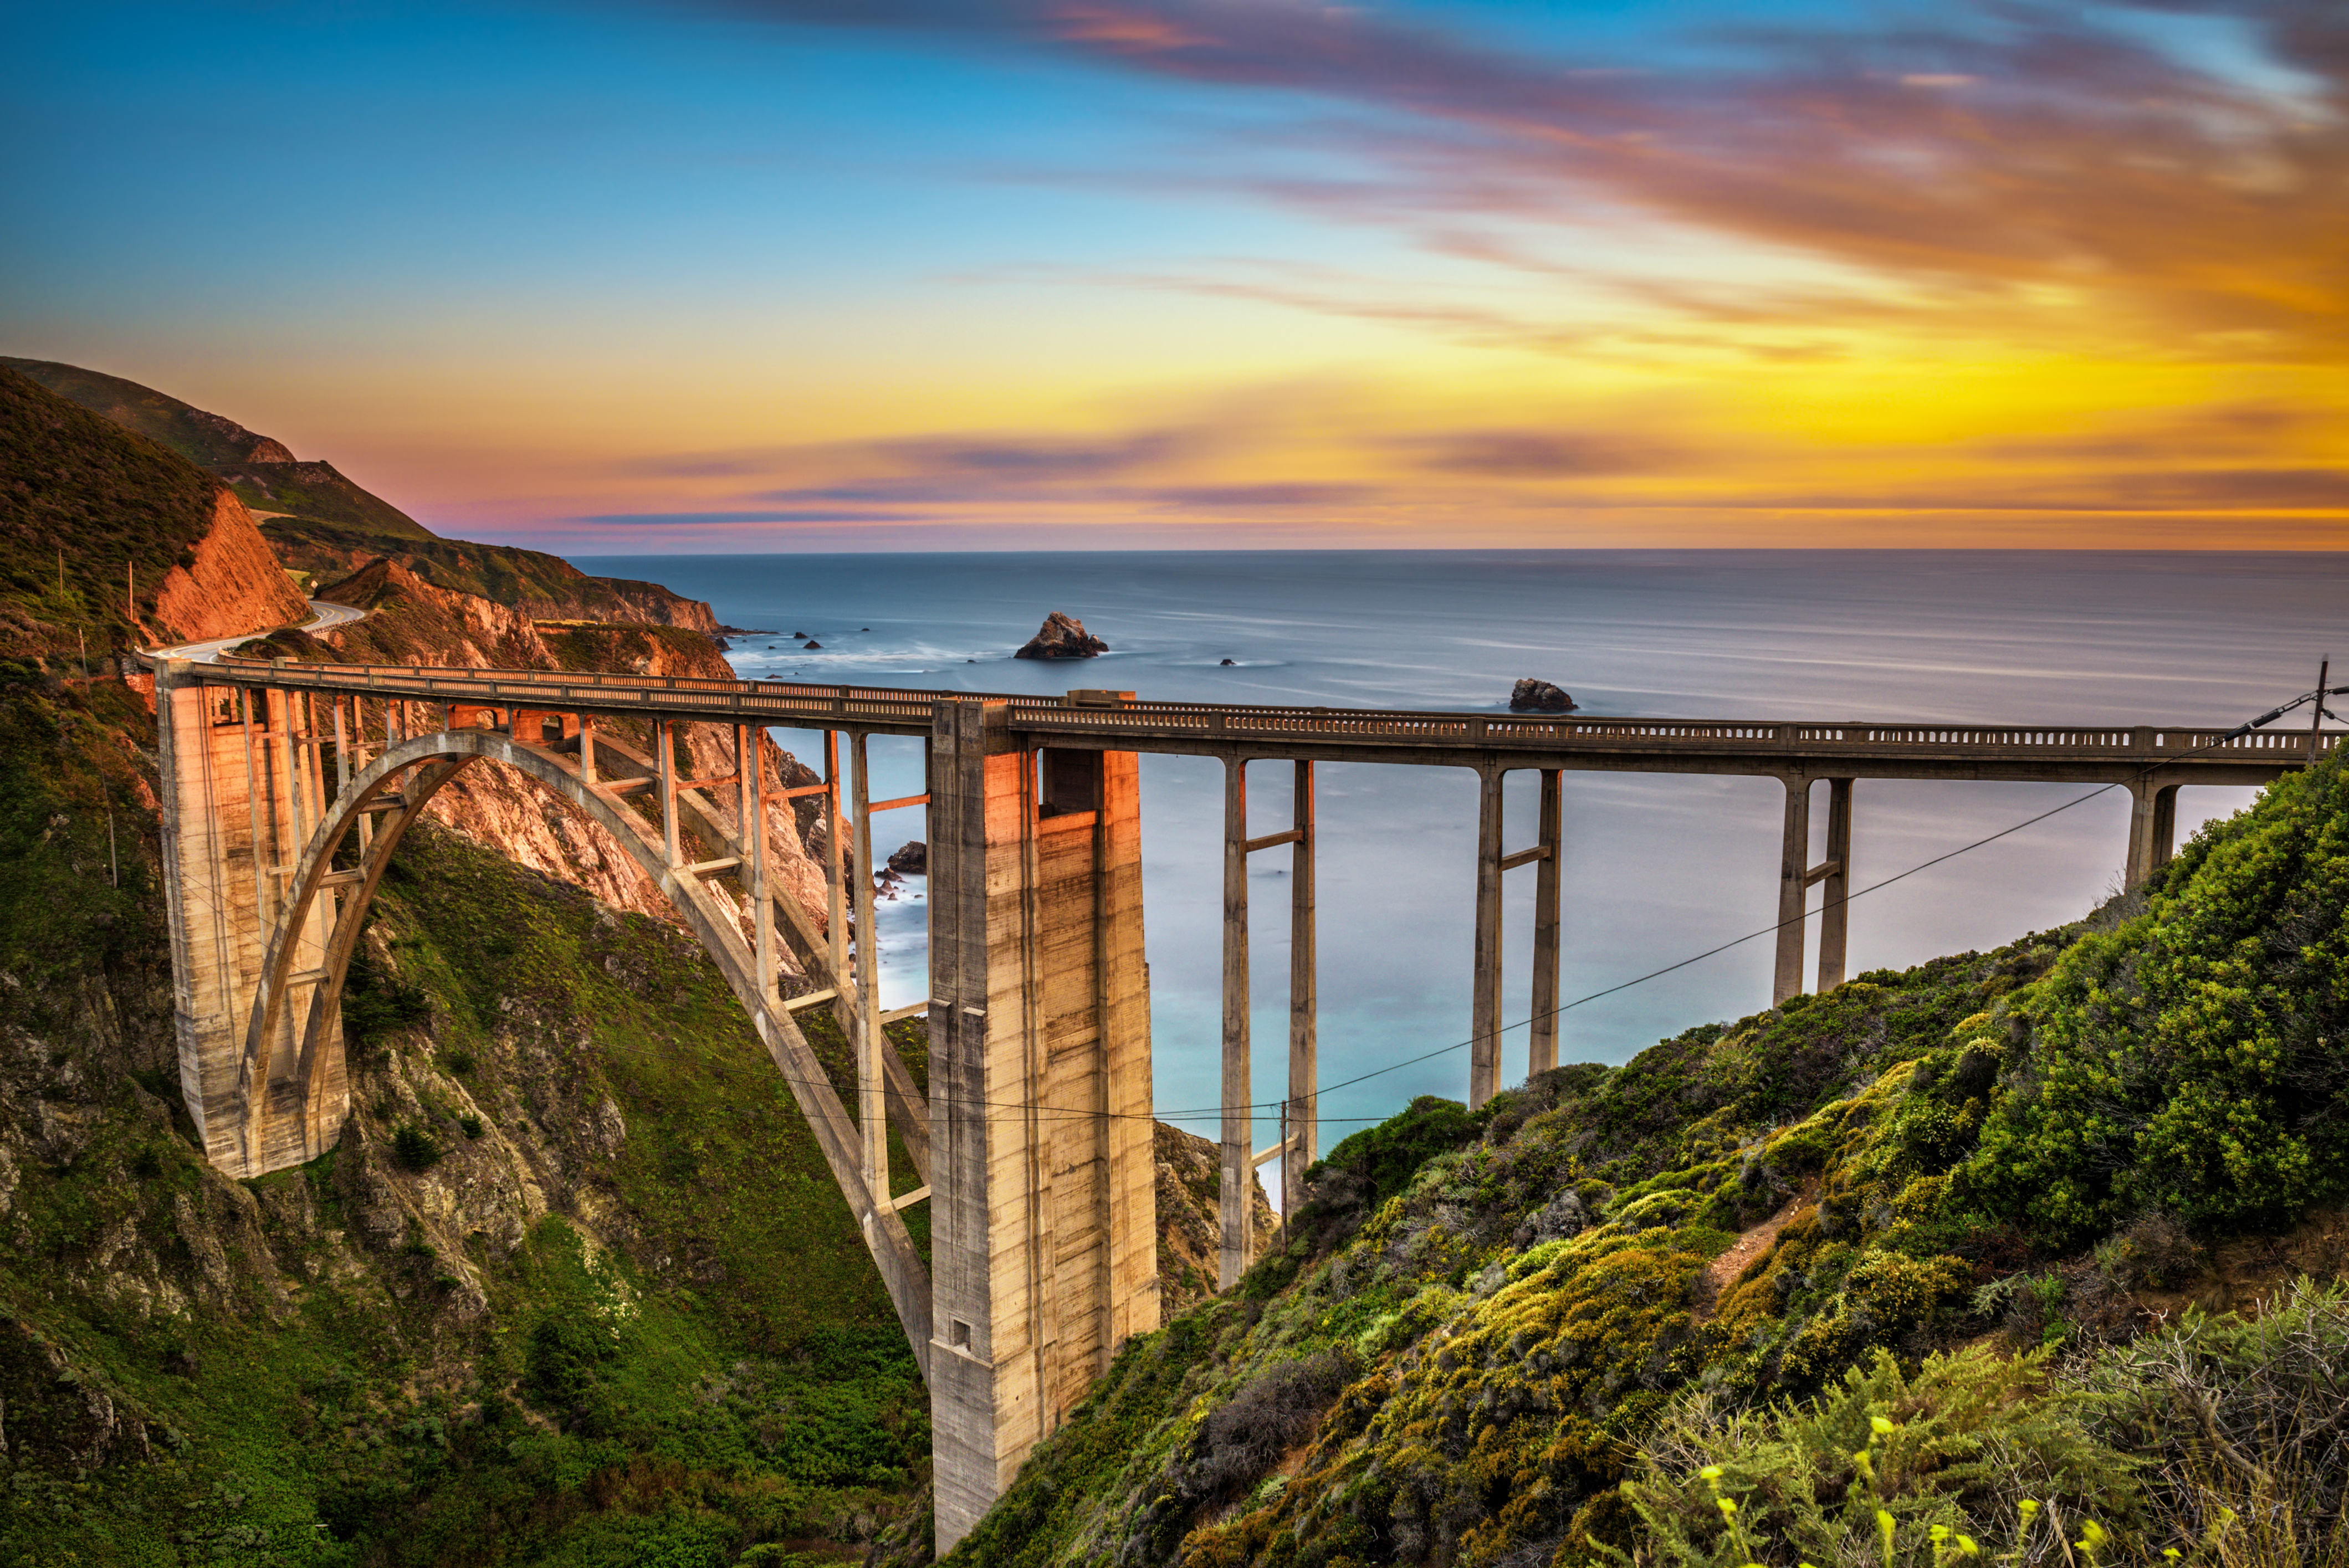 Bixby bridge pictured during the best time to visit California with the sun setting over the ocean and rocks